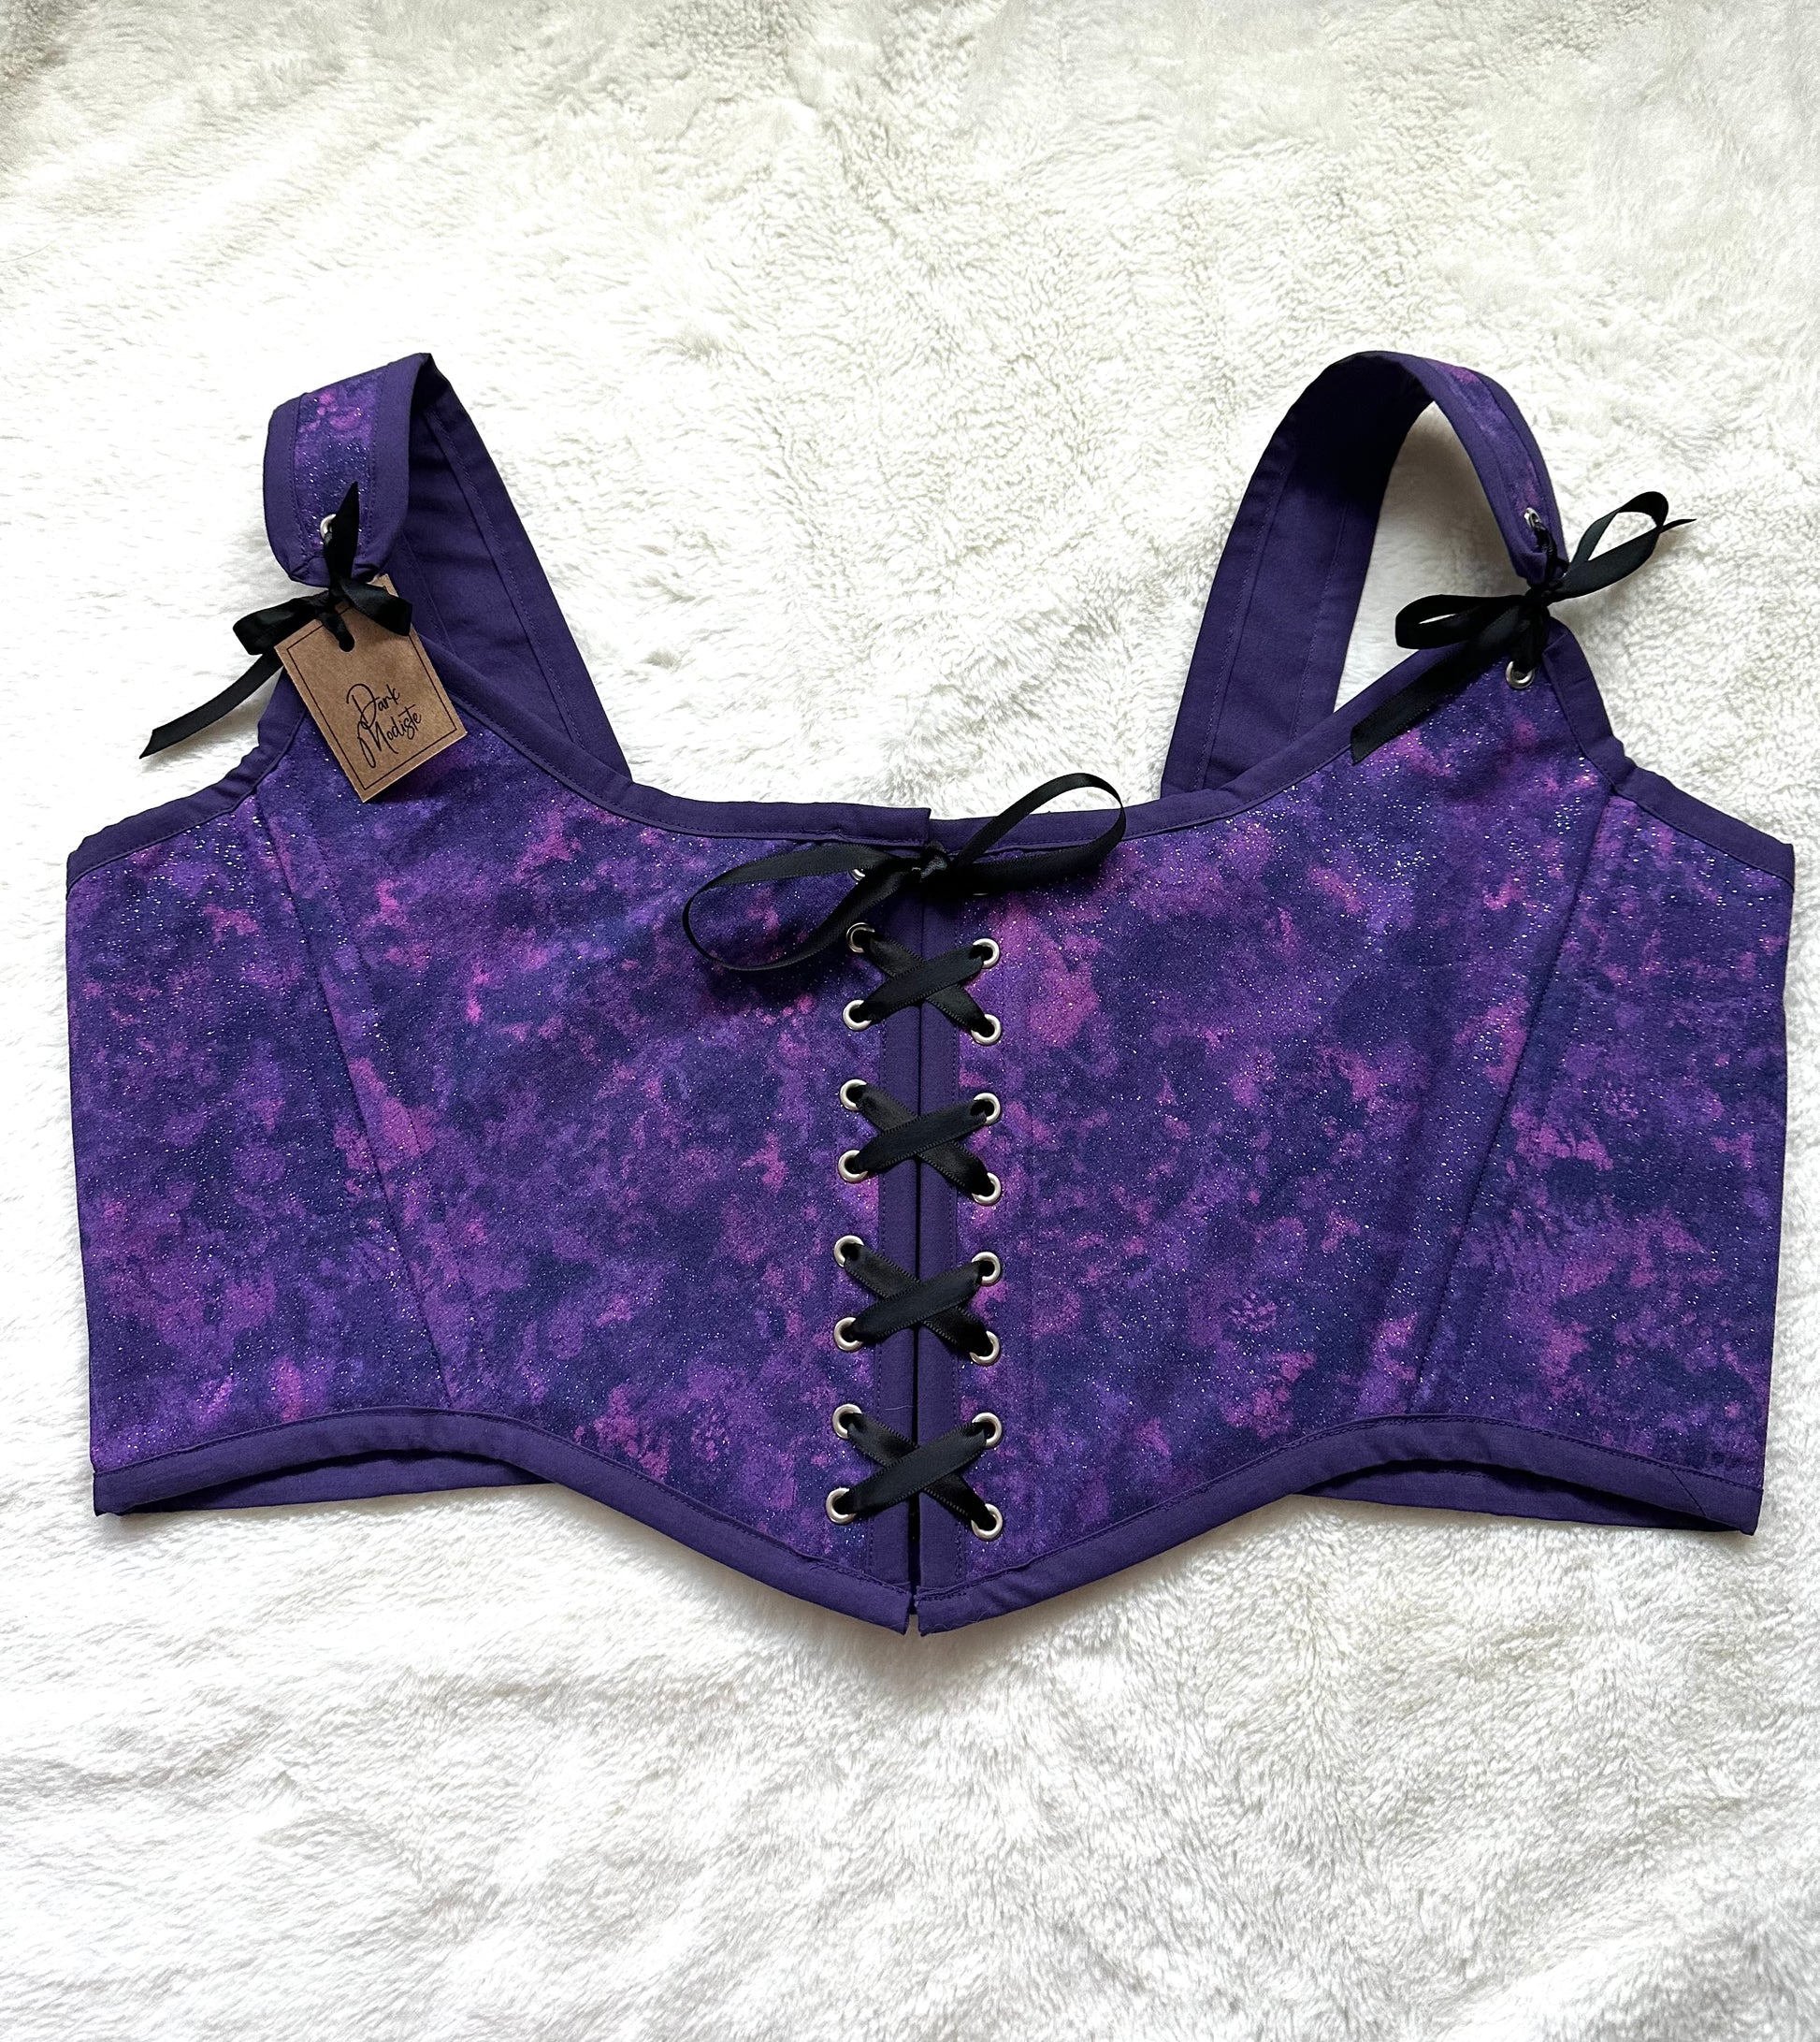 Renaissance bodice in purple and pink celestial print. Purple bias border around edges, black ribbon down center with silver grommets. Ribbon connects the straps to the bodice with a "Dark Modiste" tag on top left strap. Bodice is laying on white fluffy blanket.